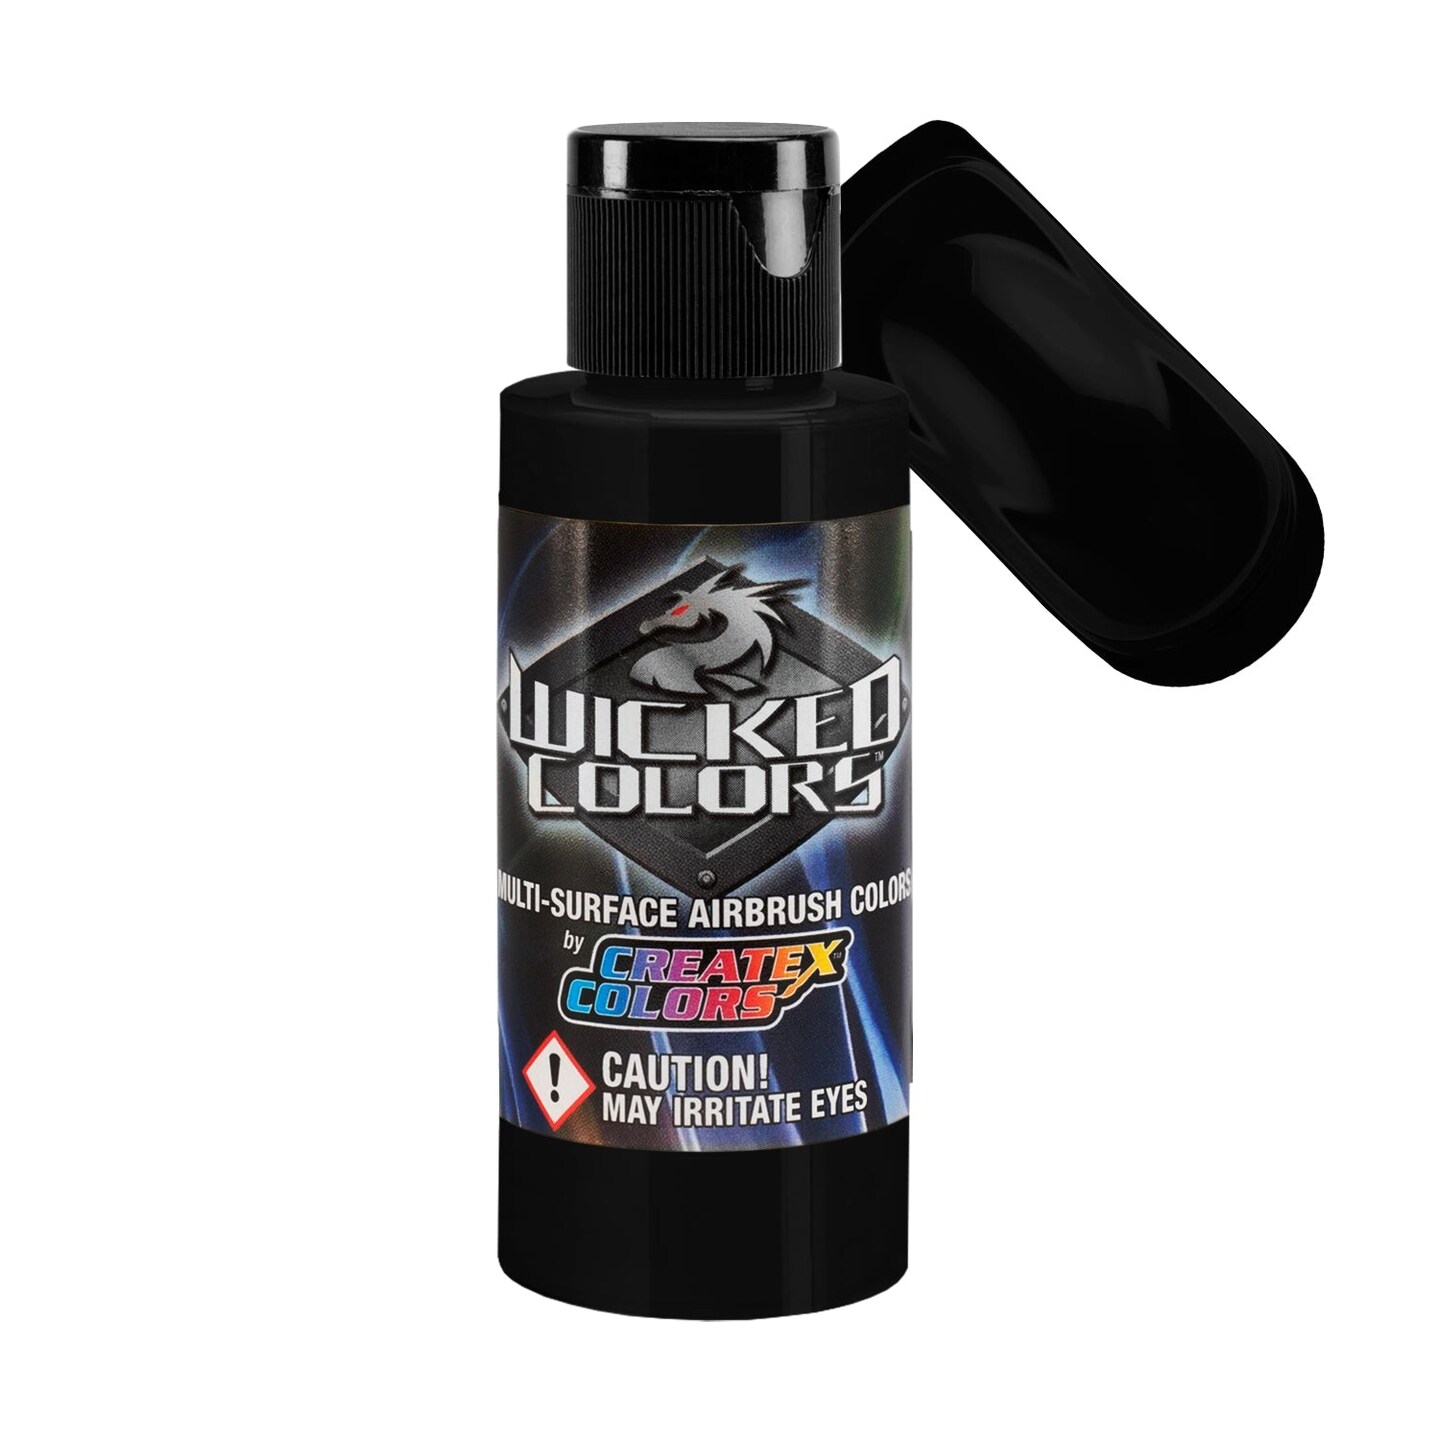 Best Airbrush Paint - Find the Best Paint for Airbrushing